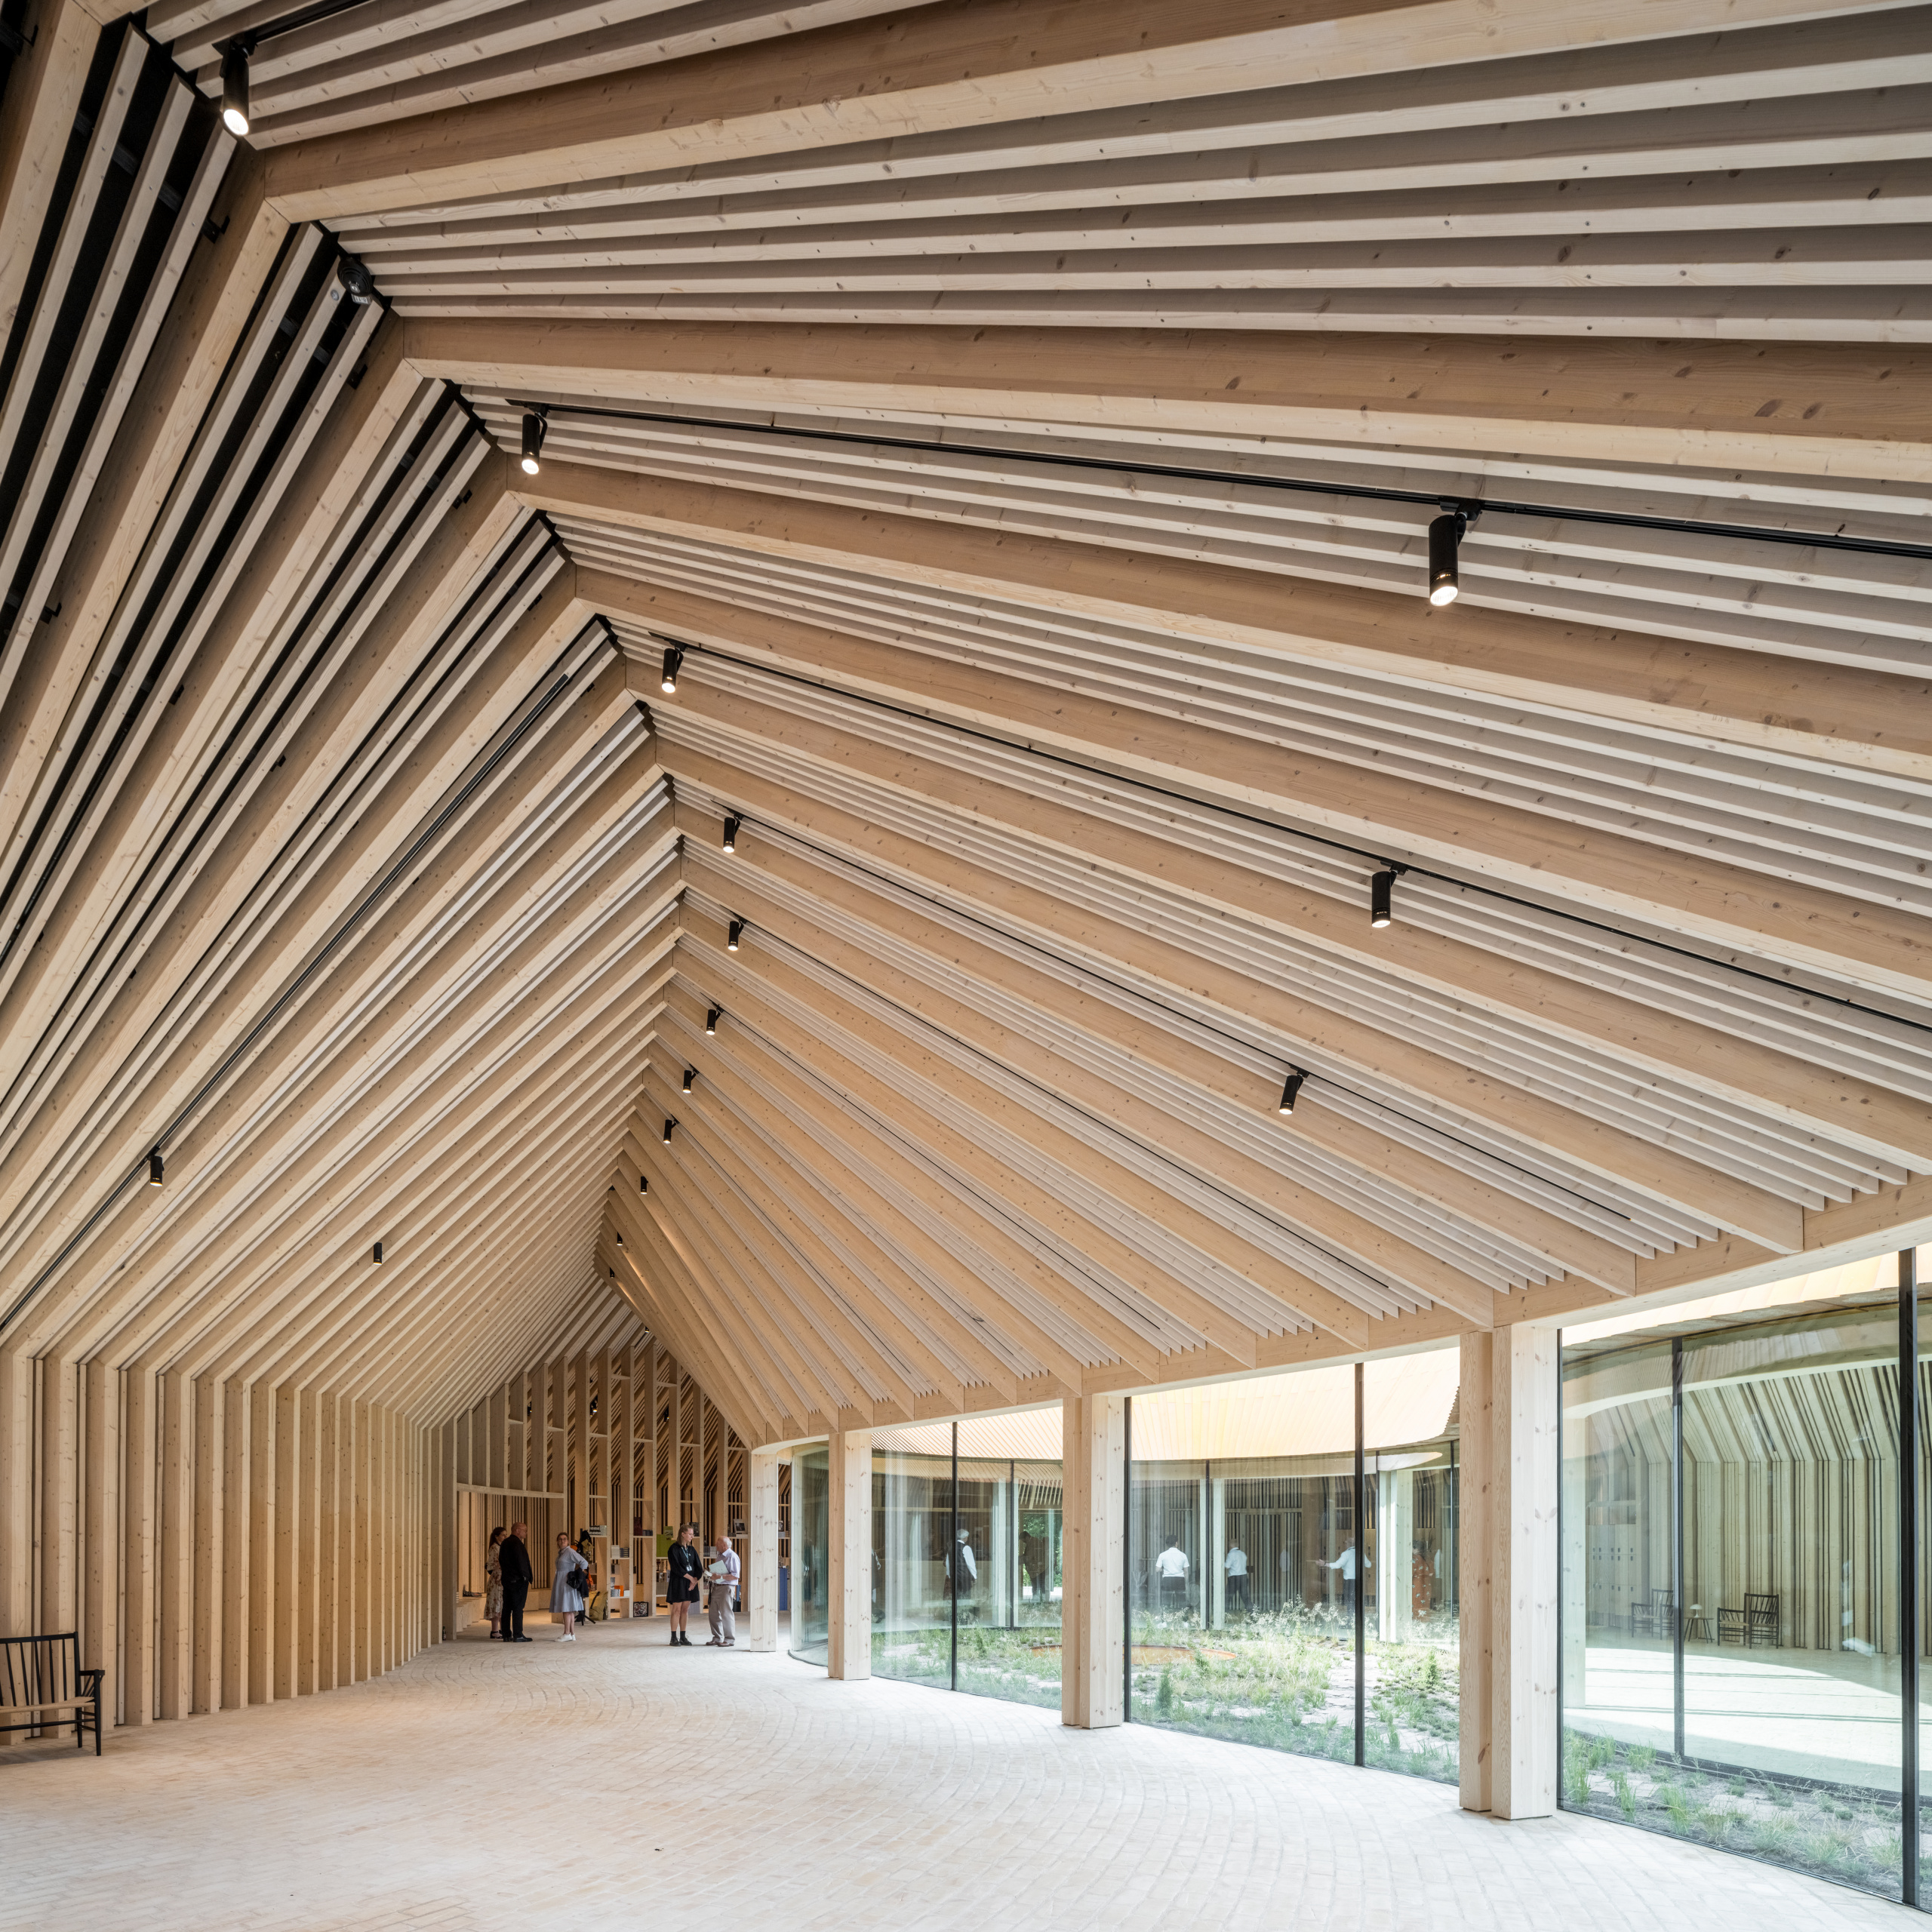 a large open museum space with a slender wooden ceiling 